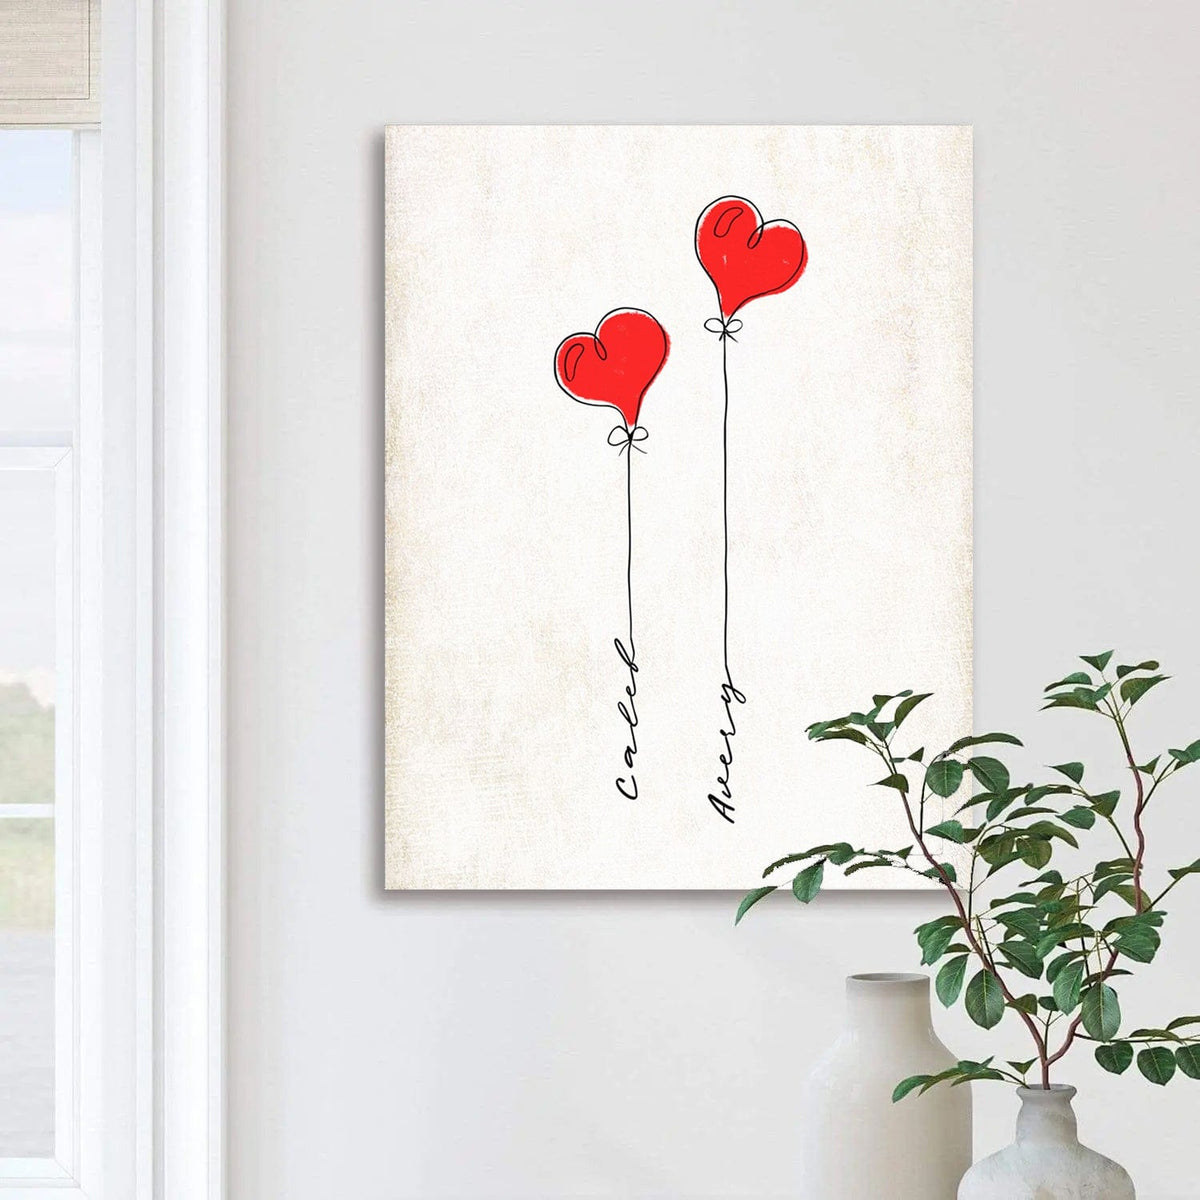 Romantic Gifts from Personal Prints